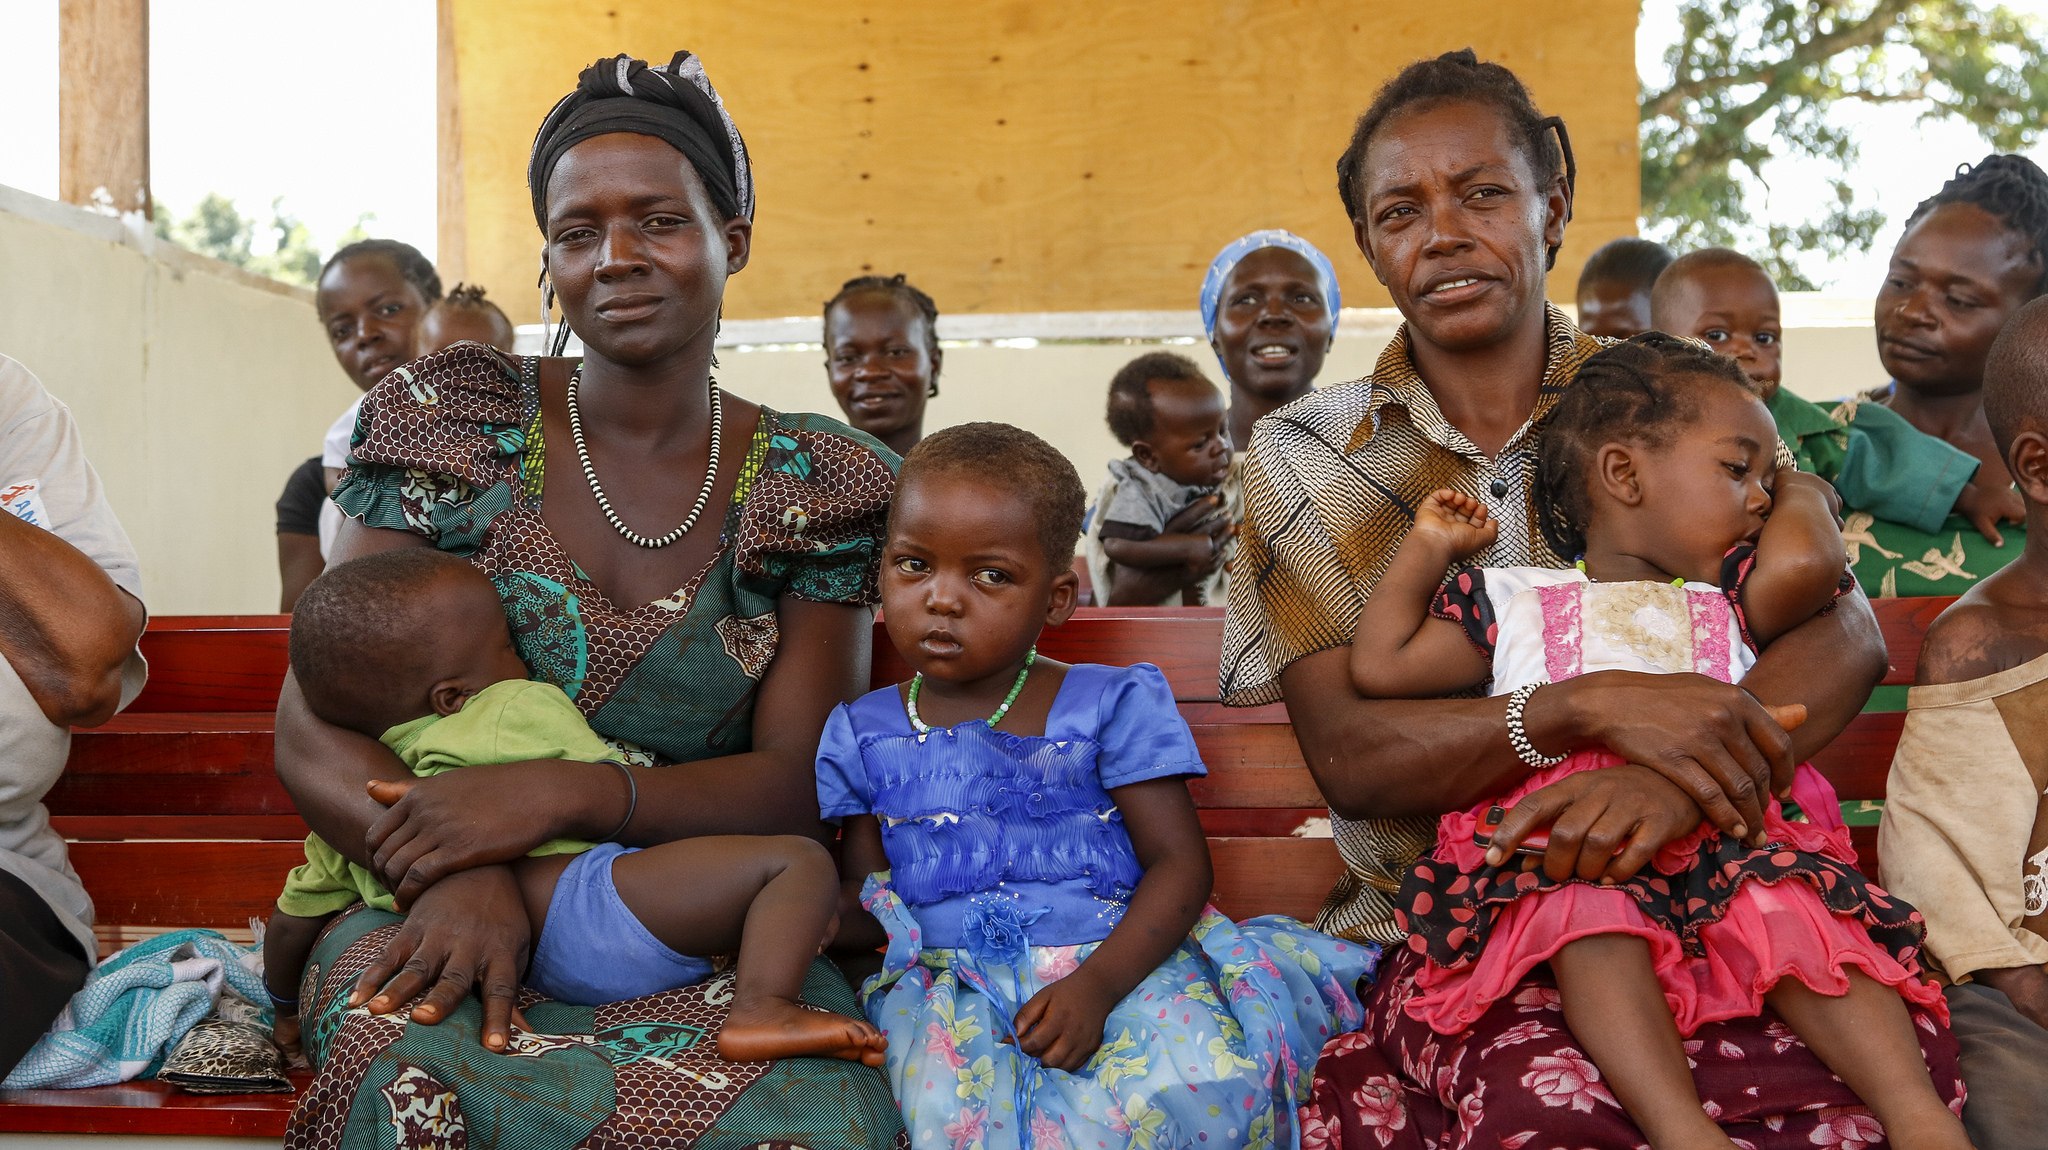 Mothers with children wait for care in South Sudan